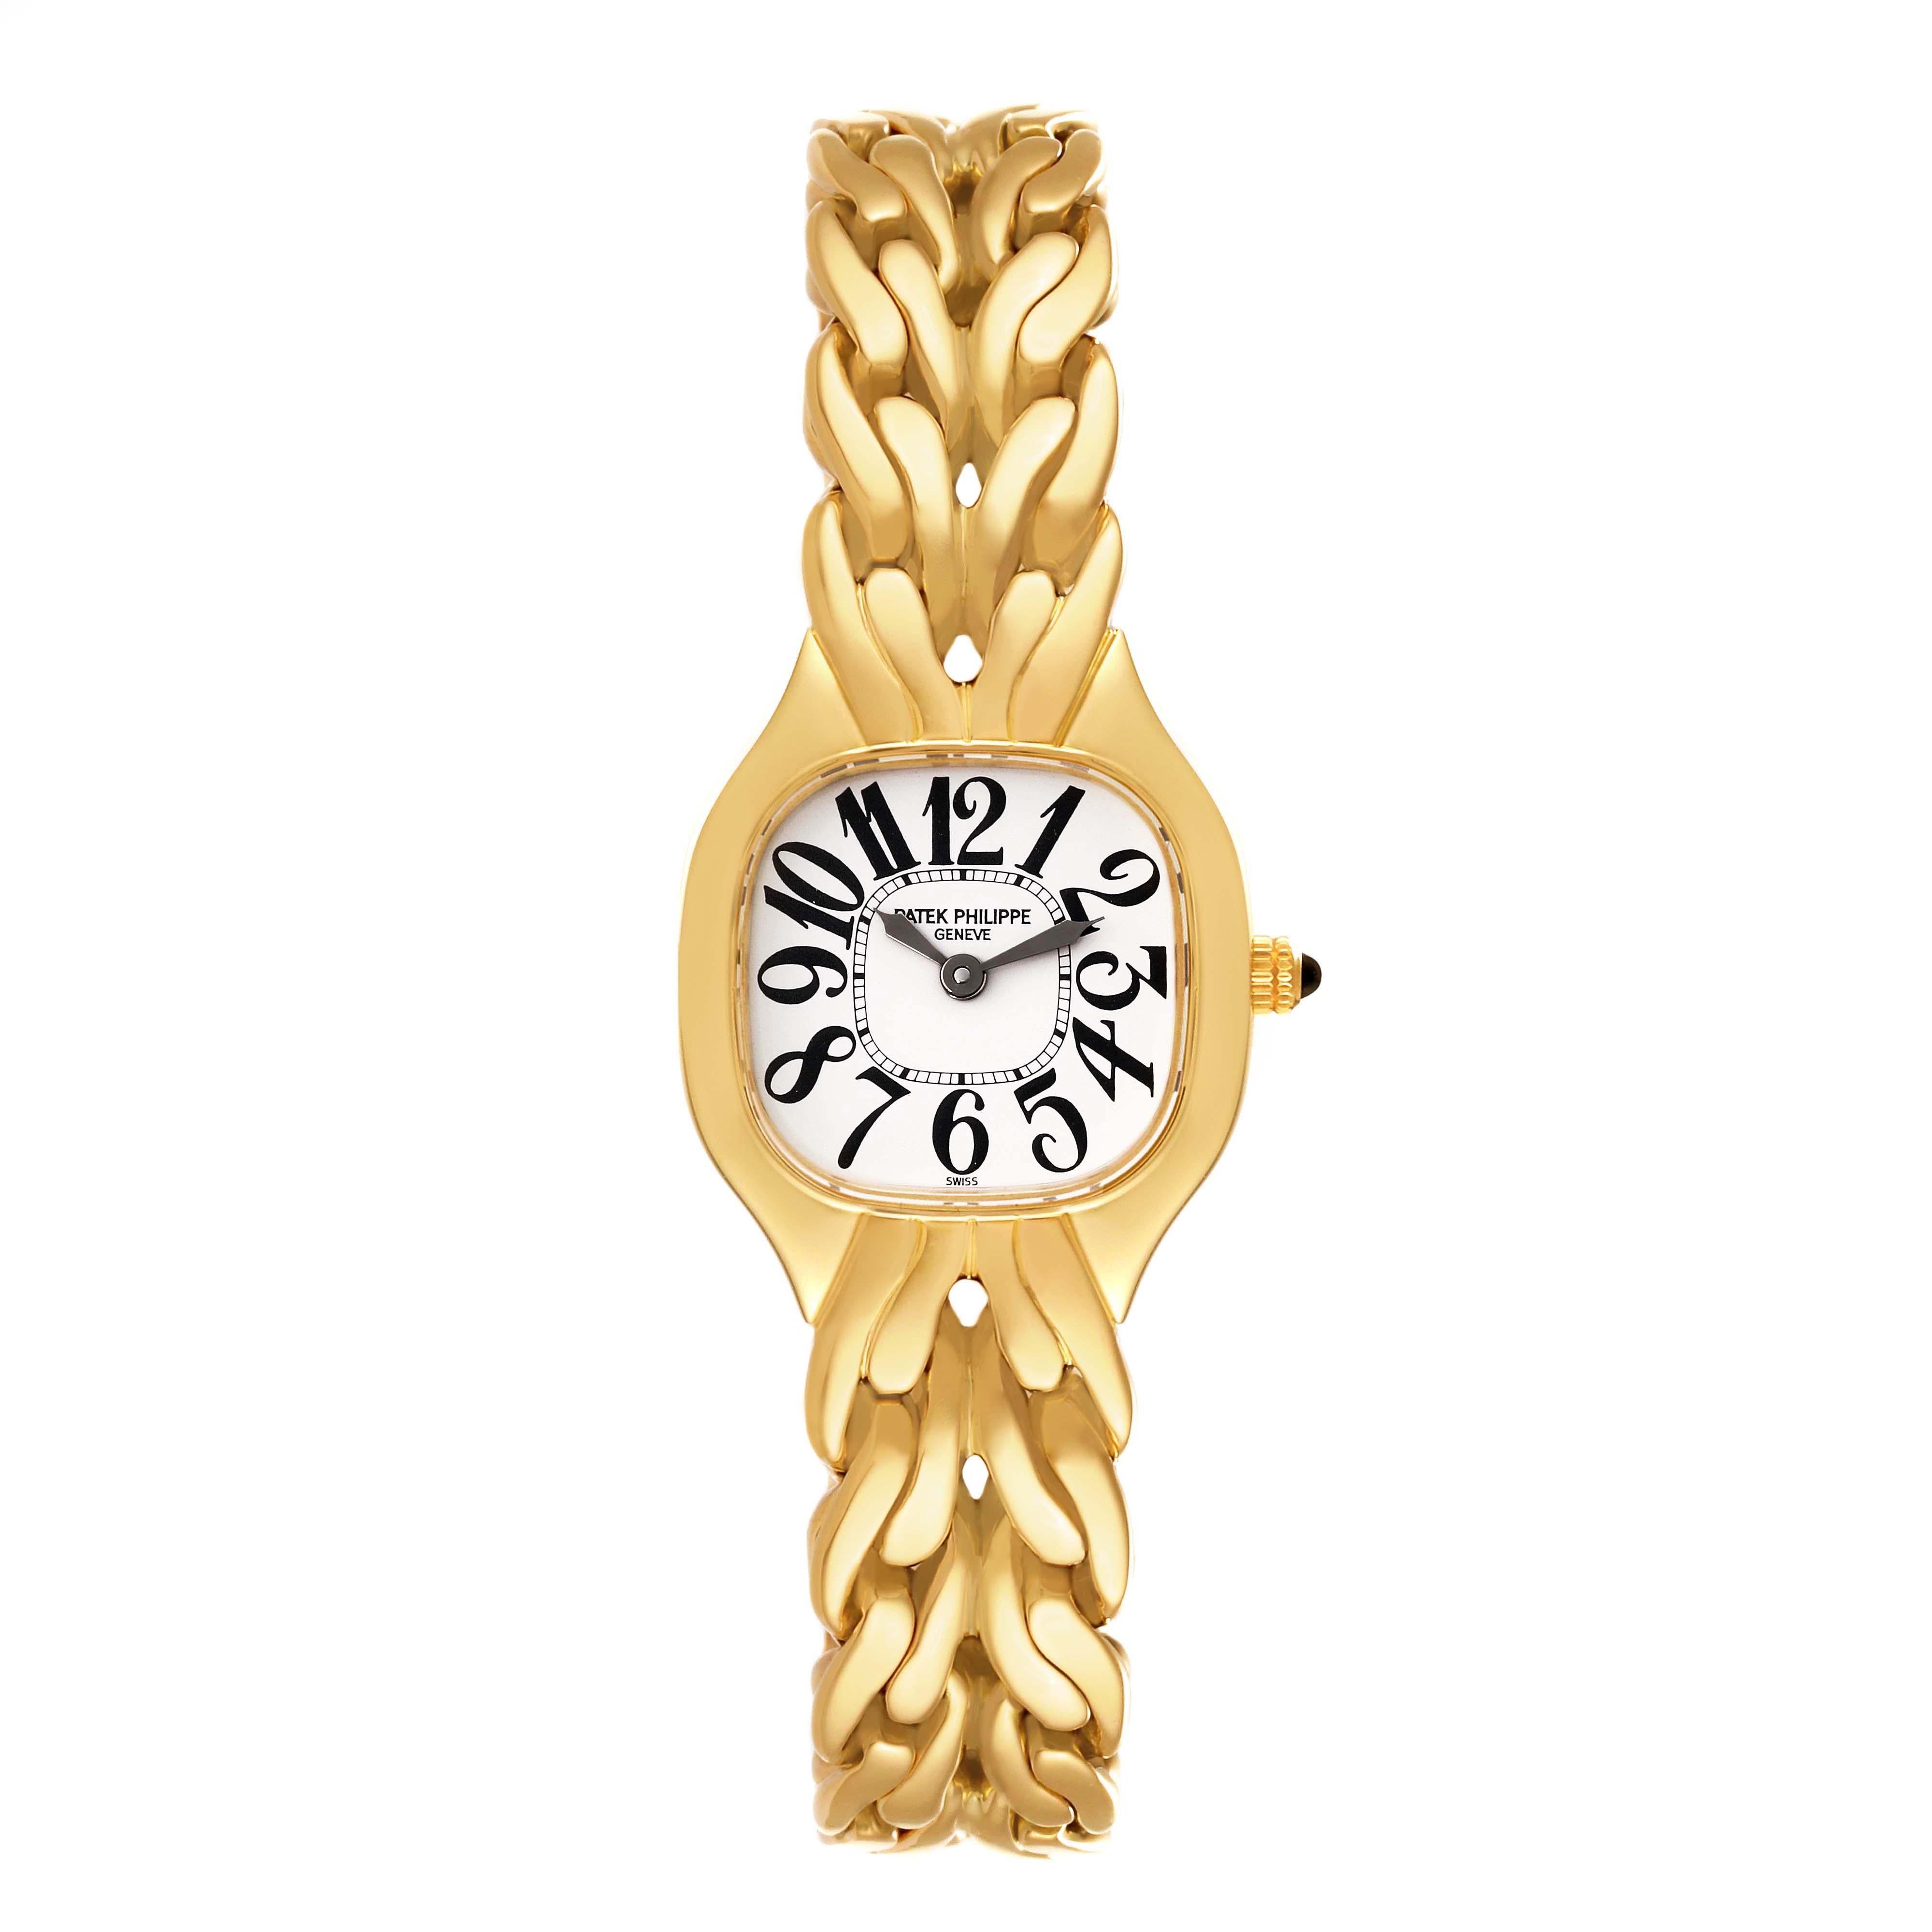 Patek Philippe La Flamme Yellow Gold Ladies Watch 4815. Quartz movement. 18k yellow gold cushion shape case 21 x 23 mm case. 18K yellow gold bezel. Scratch resistant sapphire crystal. White dial with black Arabic numeral hour markers and yellow gold